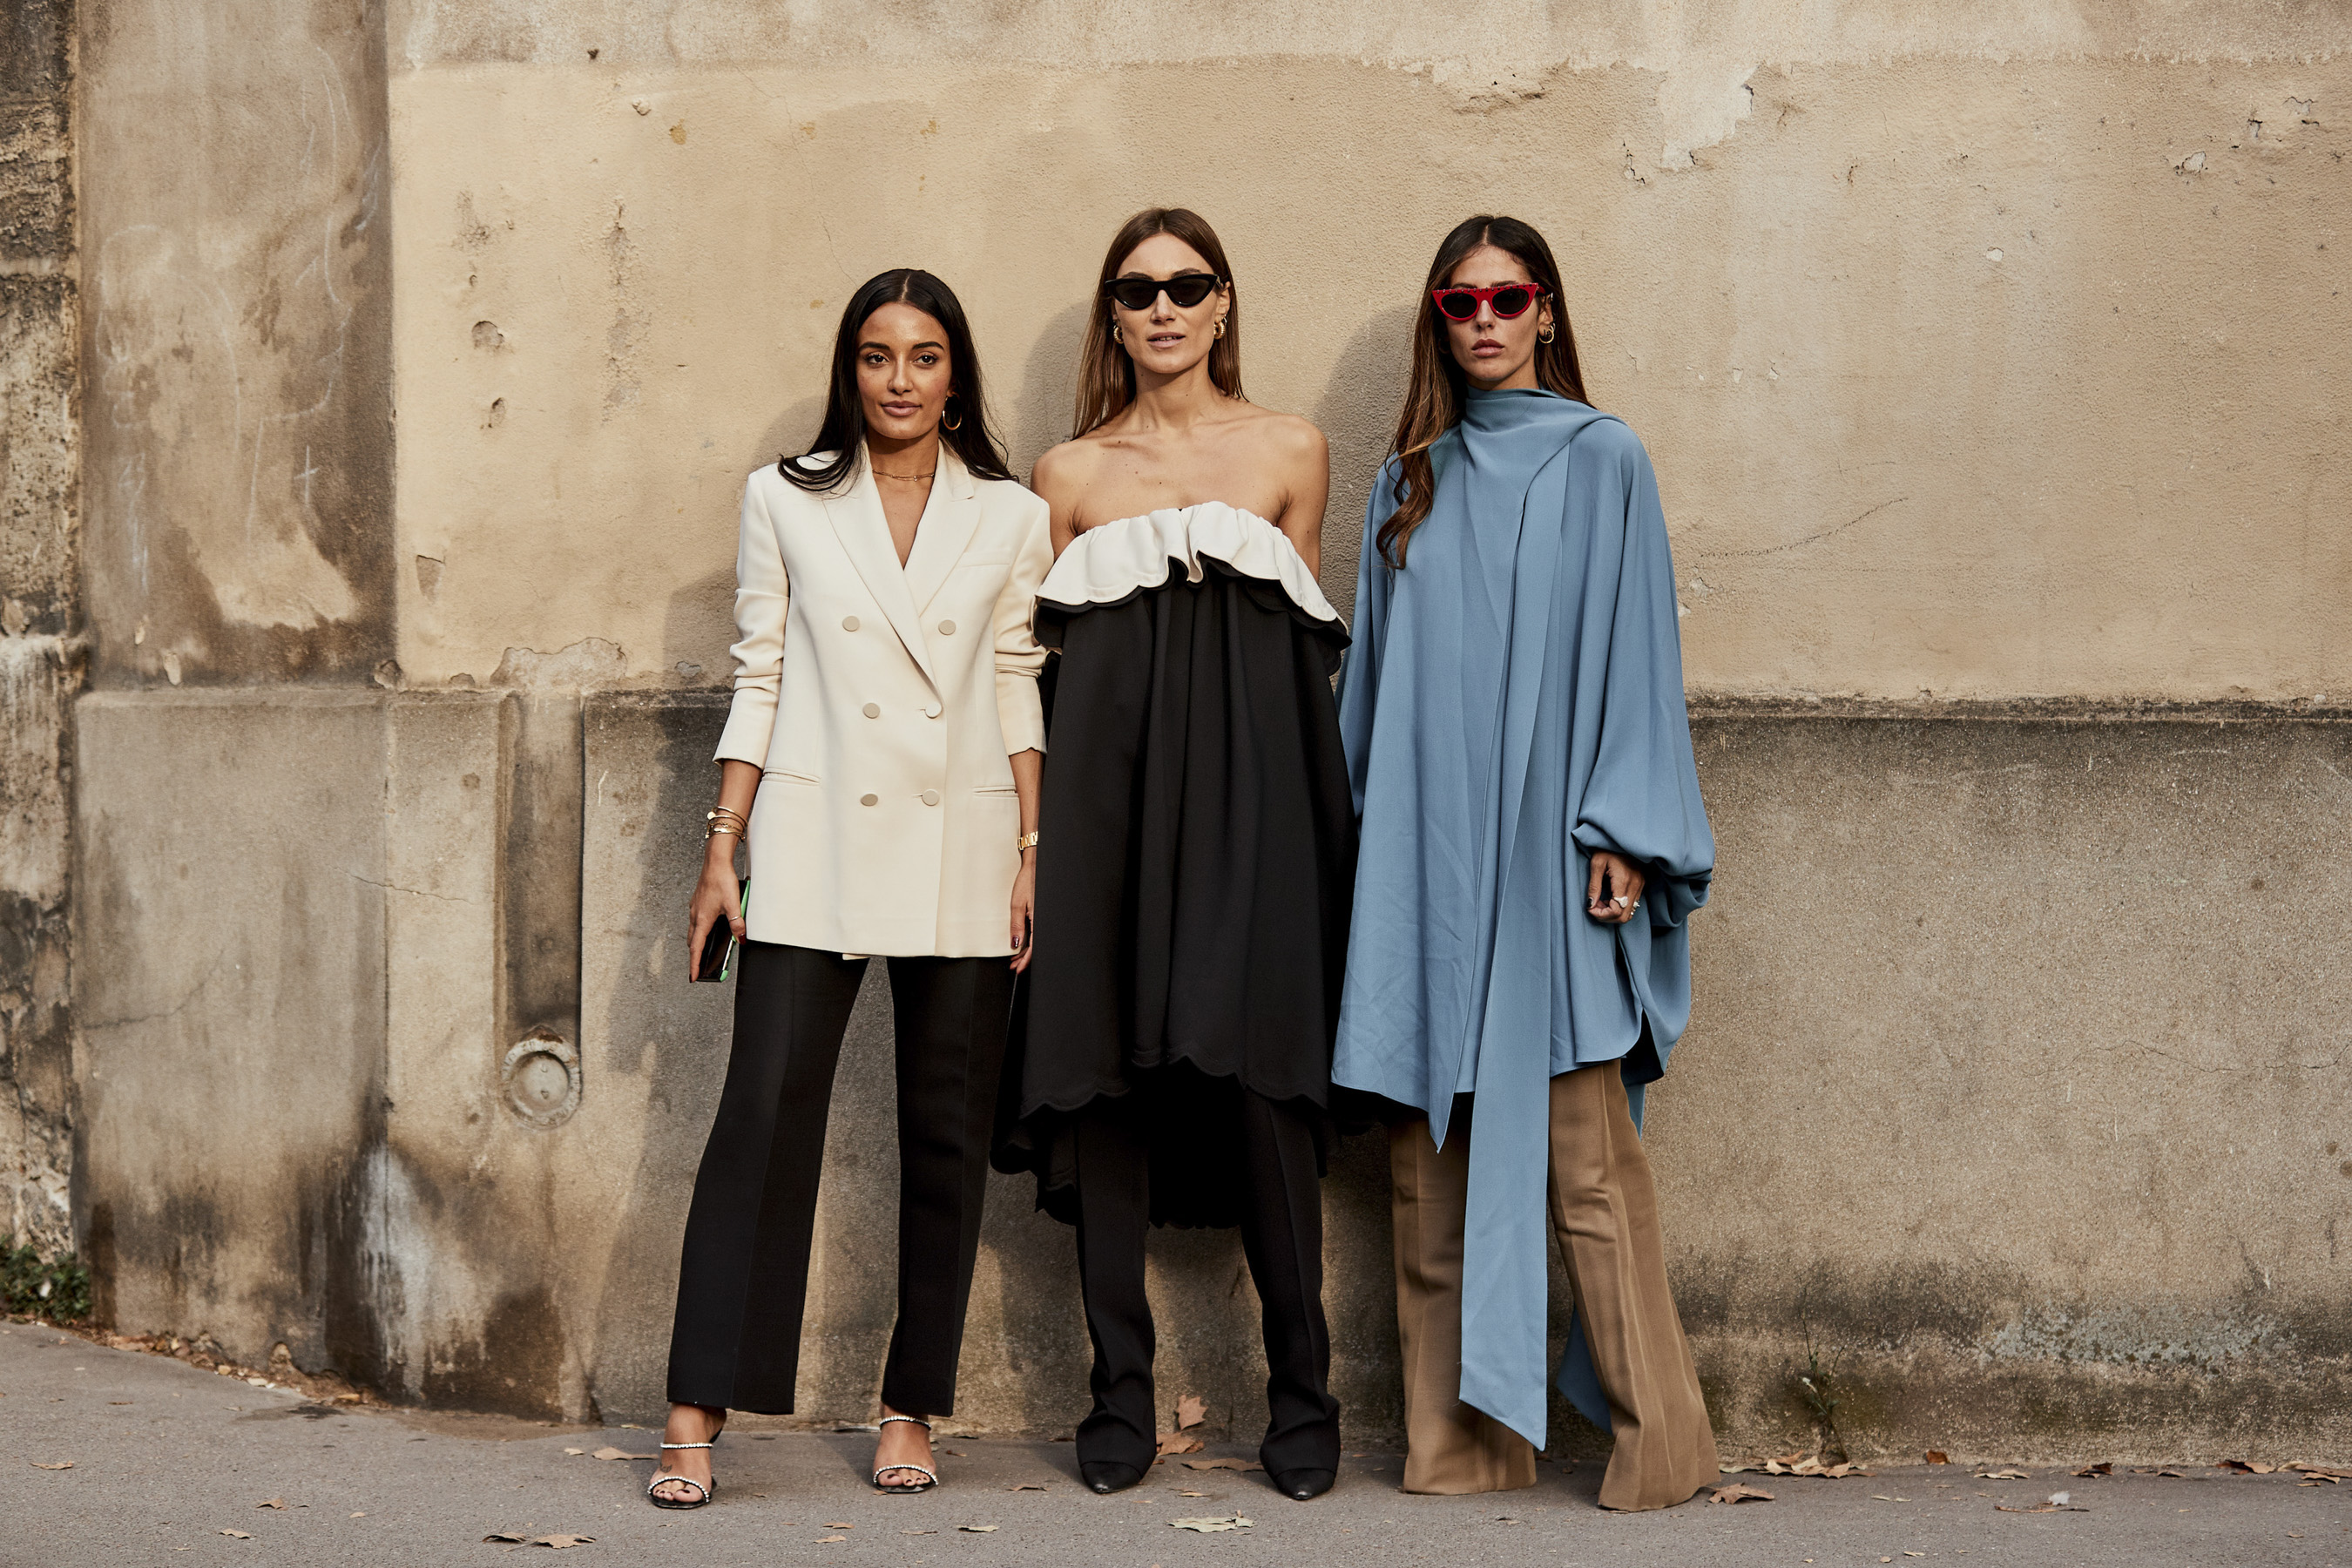 Paris Fashion Week Street Style Spring 2019 Day 7 Cont. - The Impression